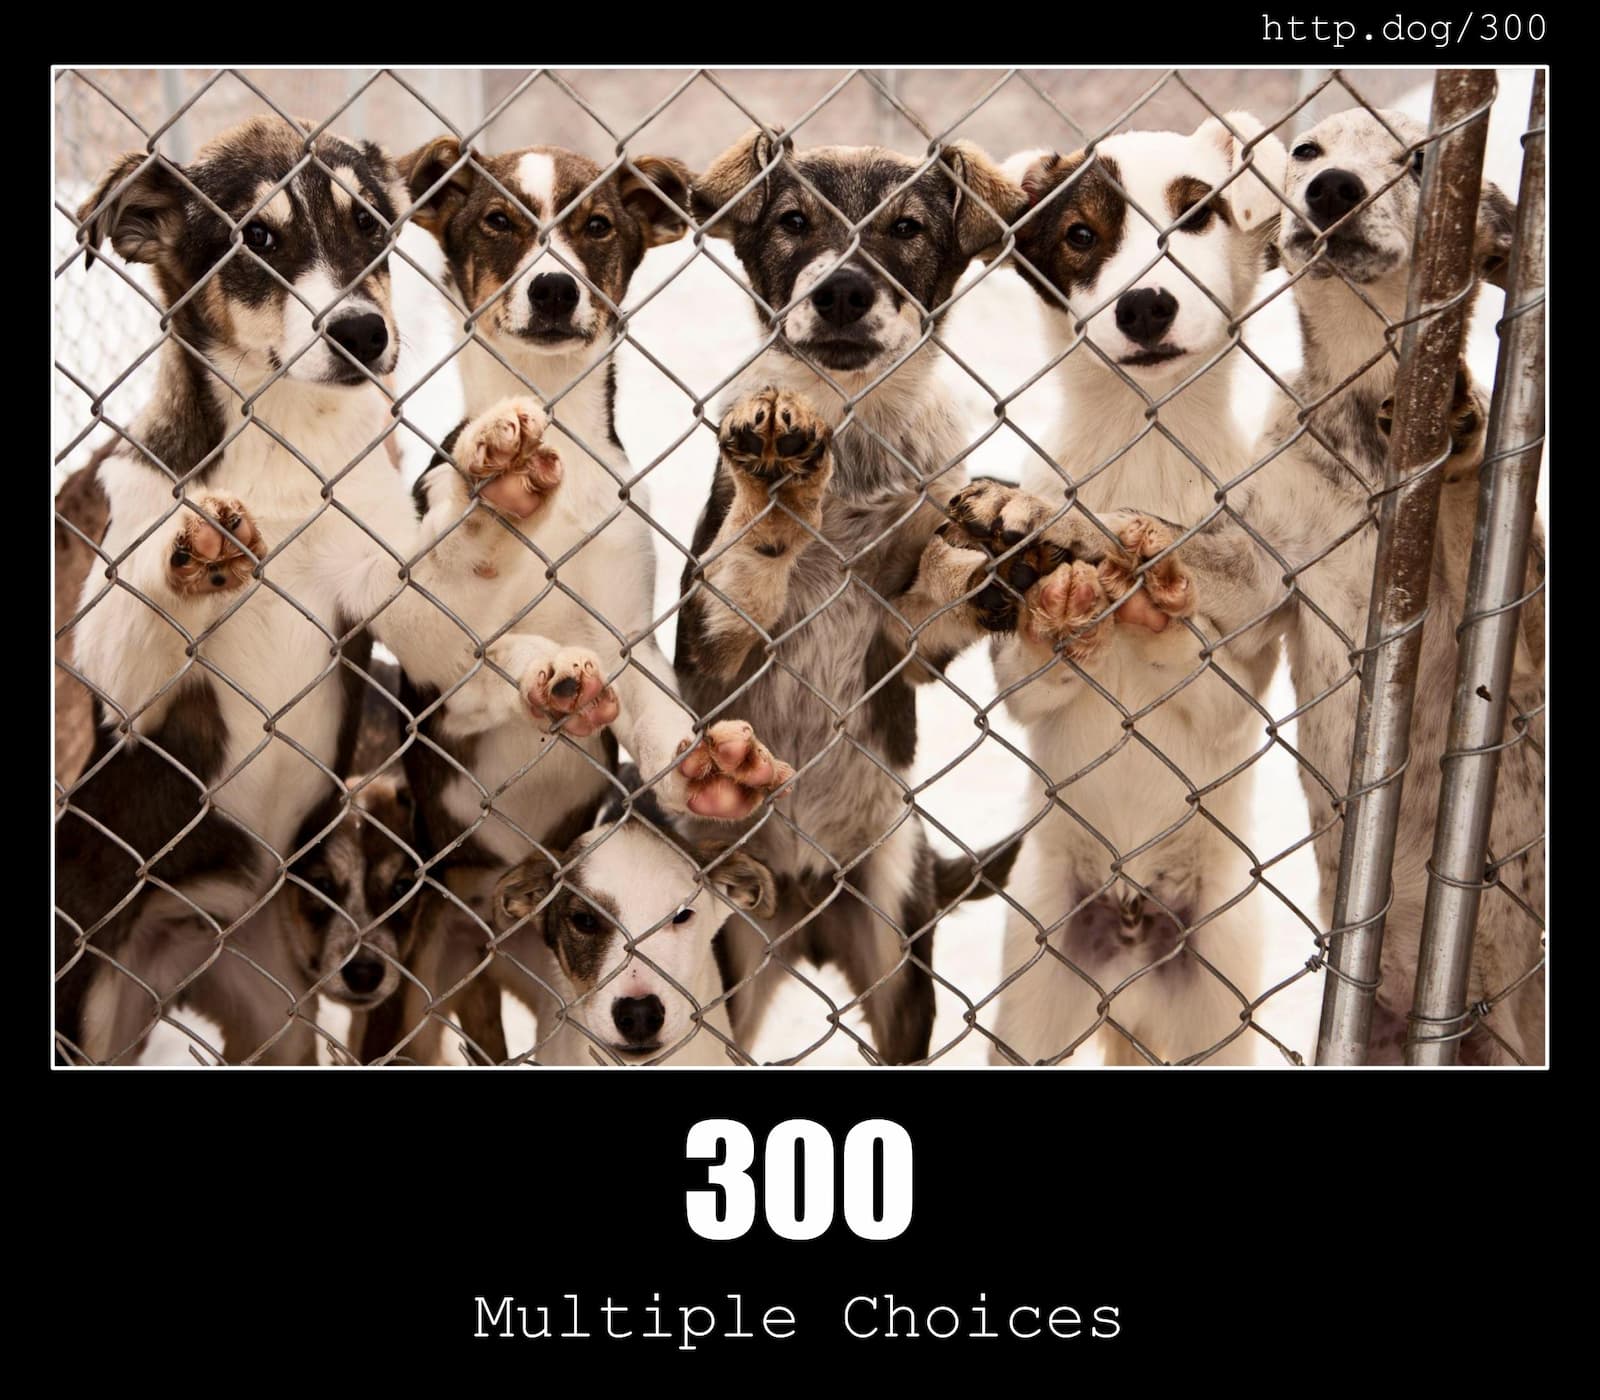 HTTP Status Code 300 Multiple Choices & Dogs